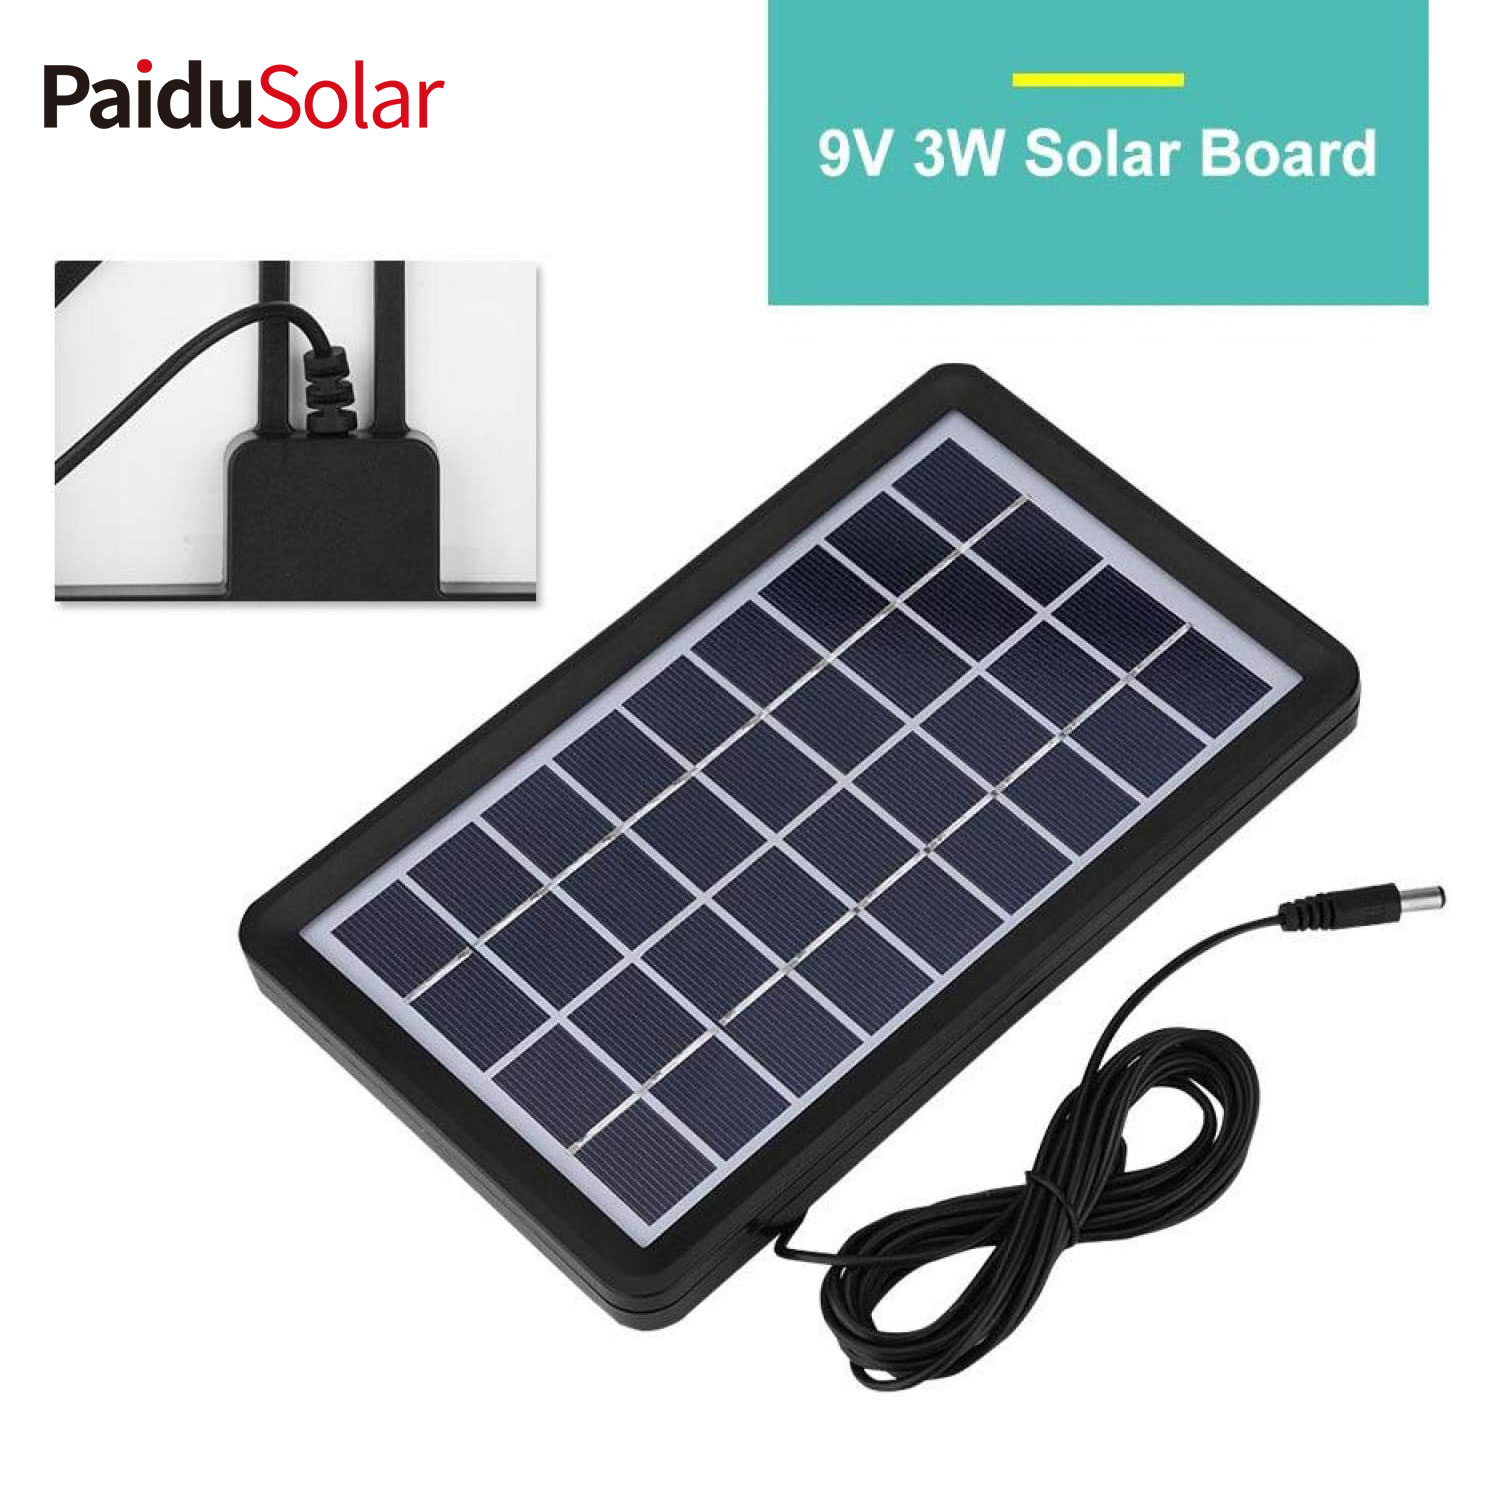 PaiduSolar 9V 3W Poly Silicon Solar Panel Solar Cell For Battery Charging Boat_2nno